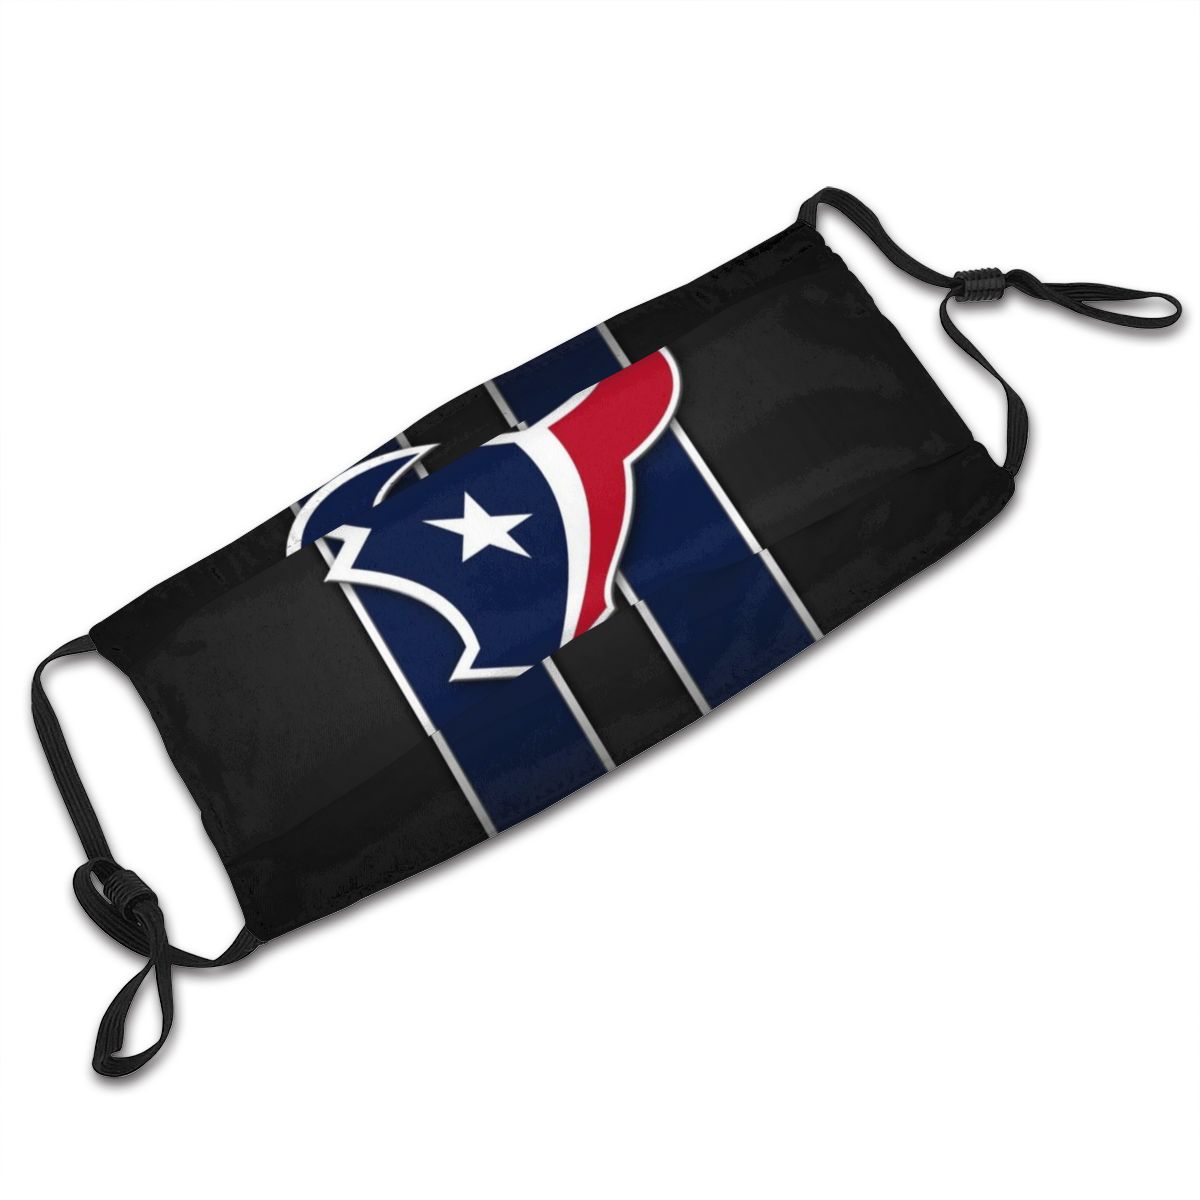 Print Football Personalized Houston Texans 5 Dust Face Mask With Filters PM 2.5